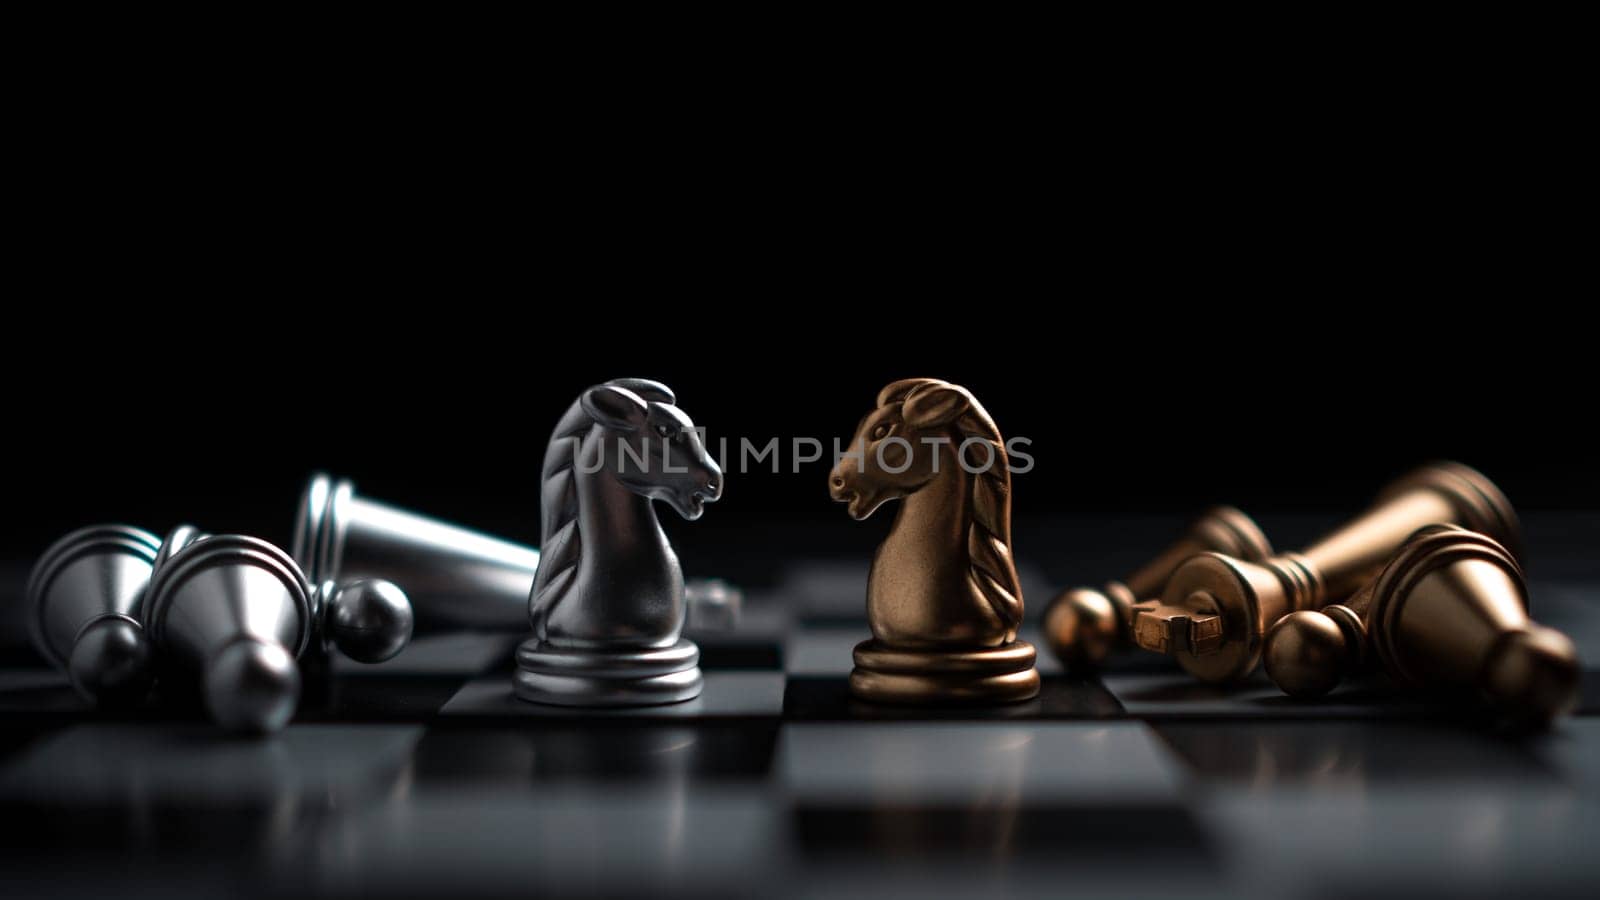 Gold and silver chess pieces in chess board game for business comparison. Leadership concepts, human resource management concepts, business administration concepts. by Unimages2527